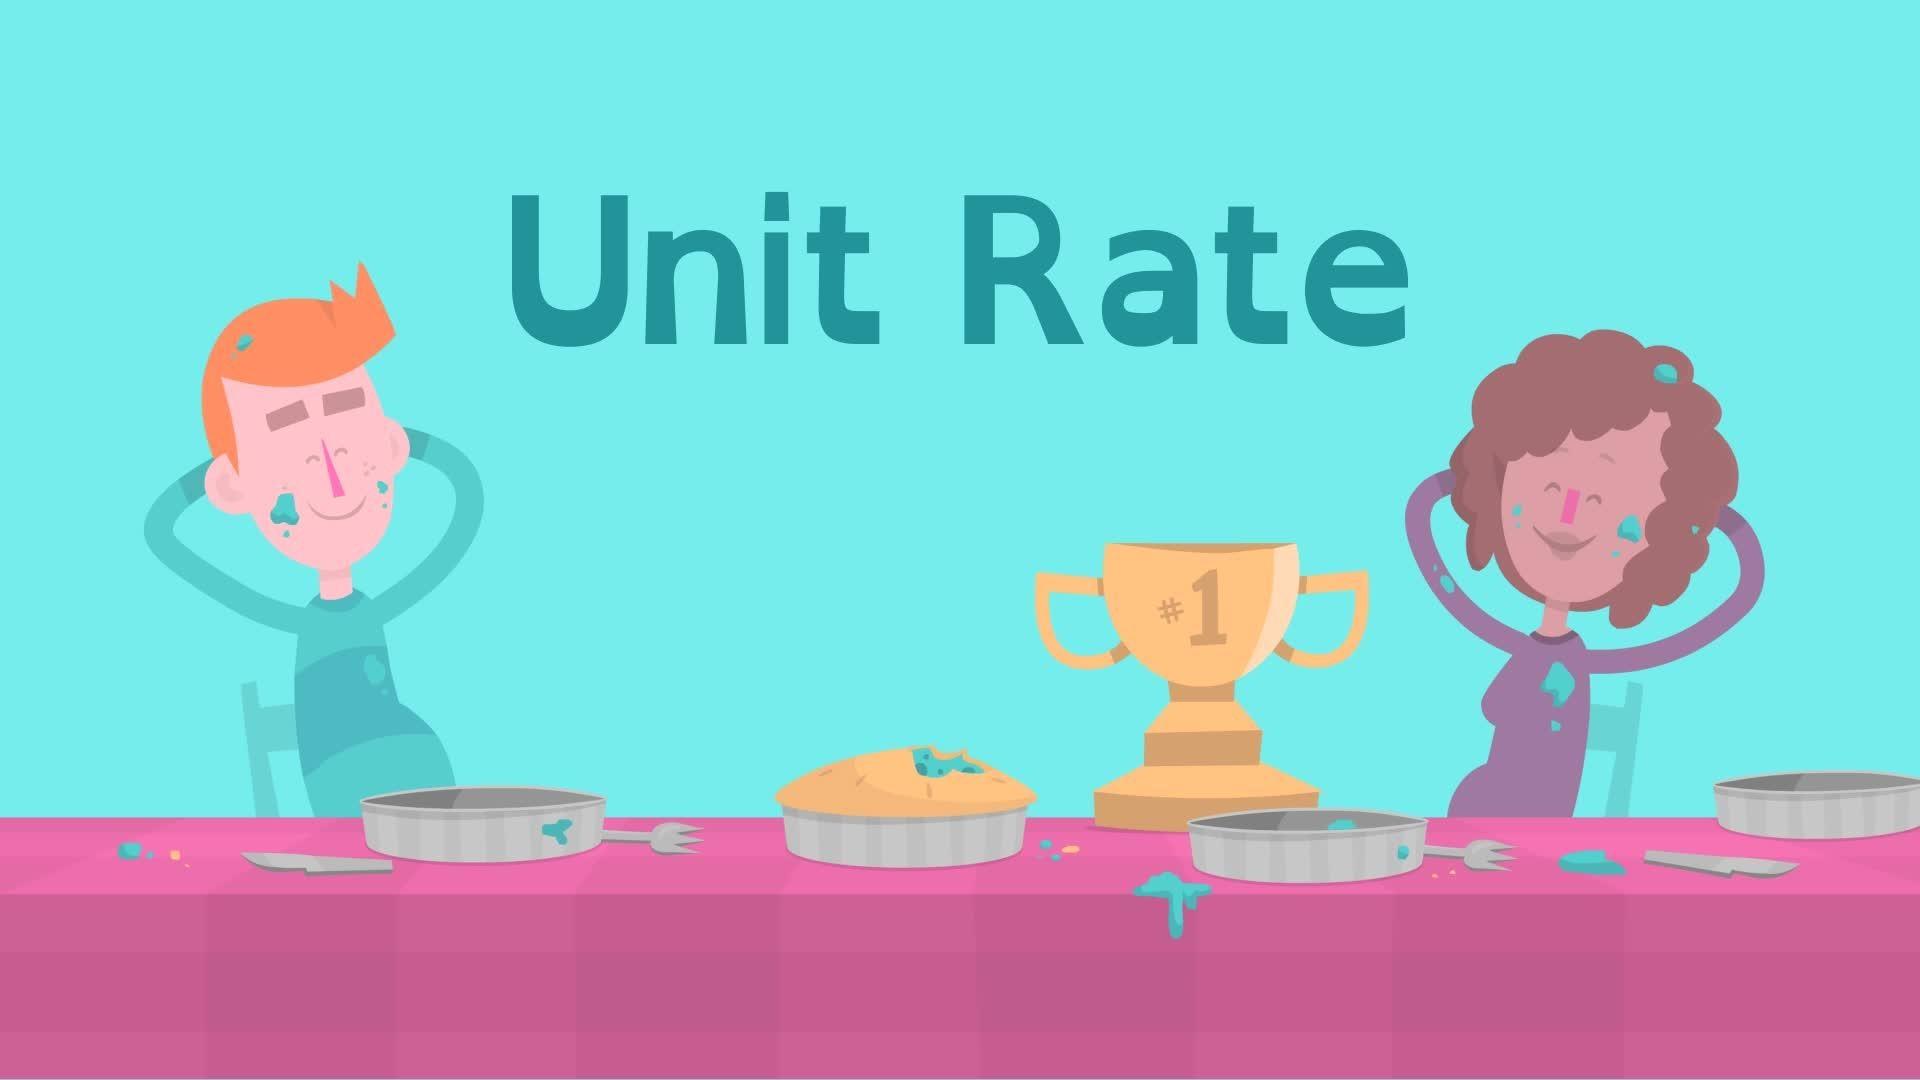 what are unit rates